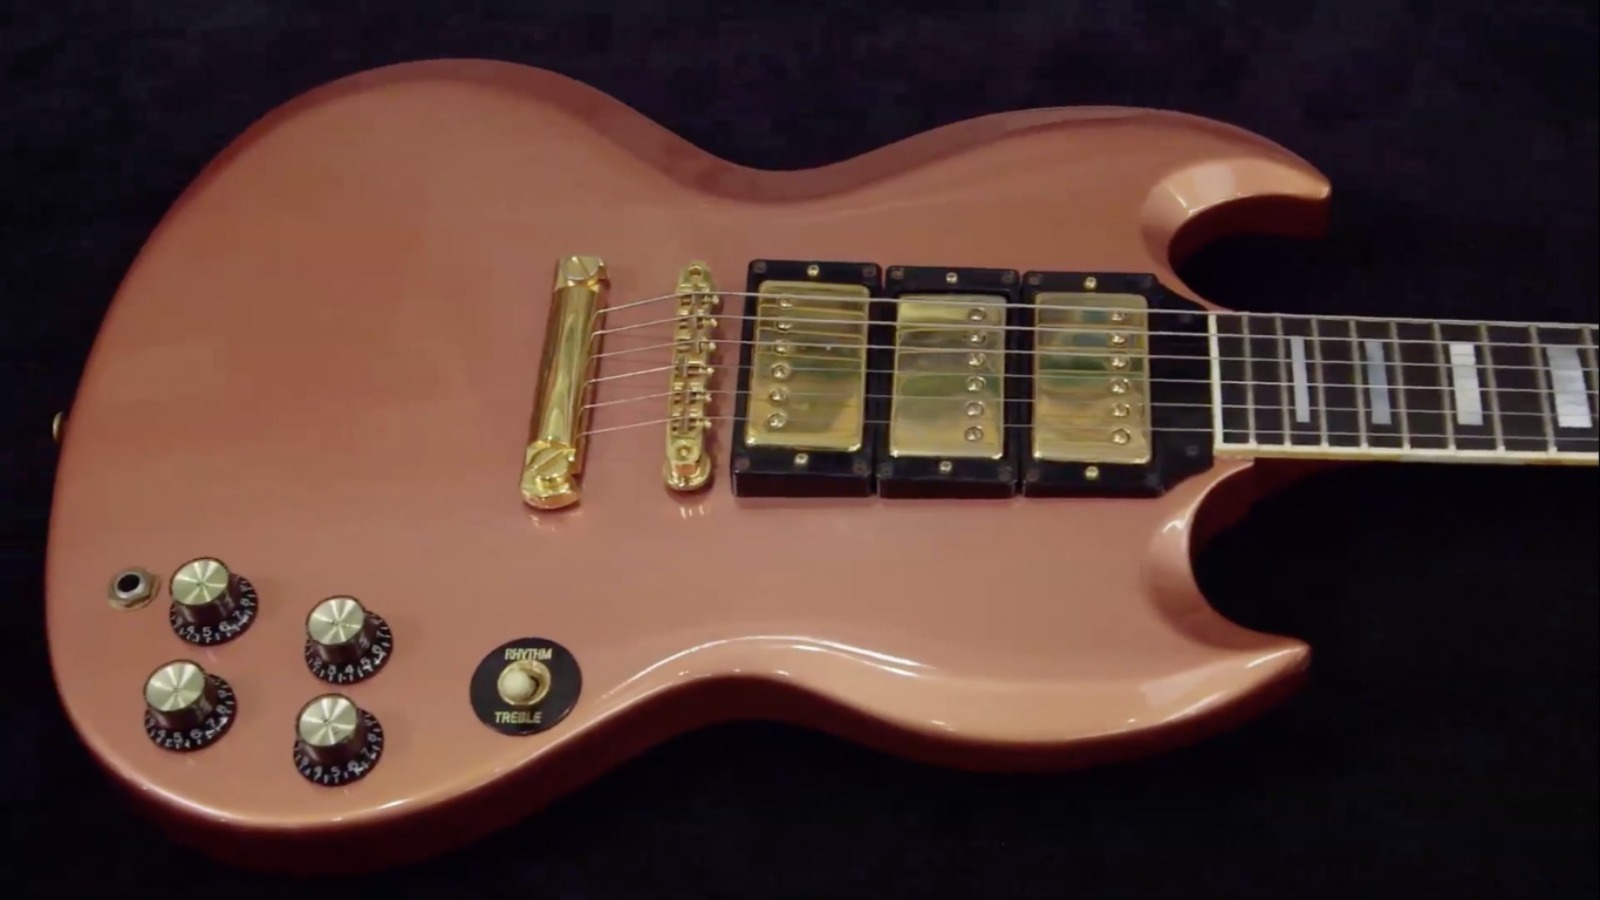 The Rare Guitar That Fetched $3,000 On Pawn Stars